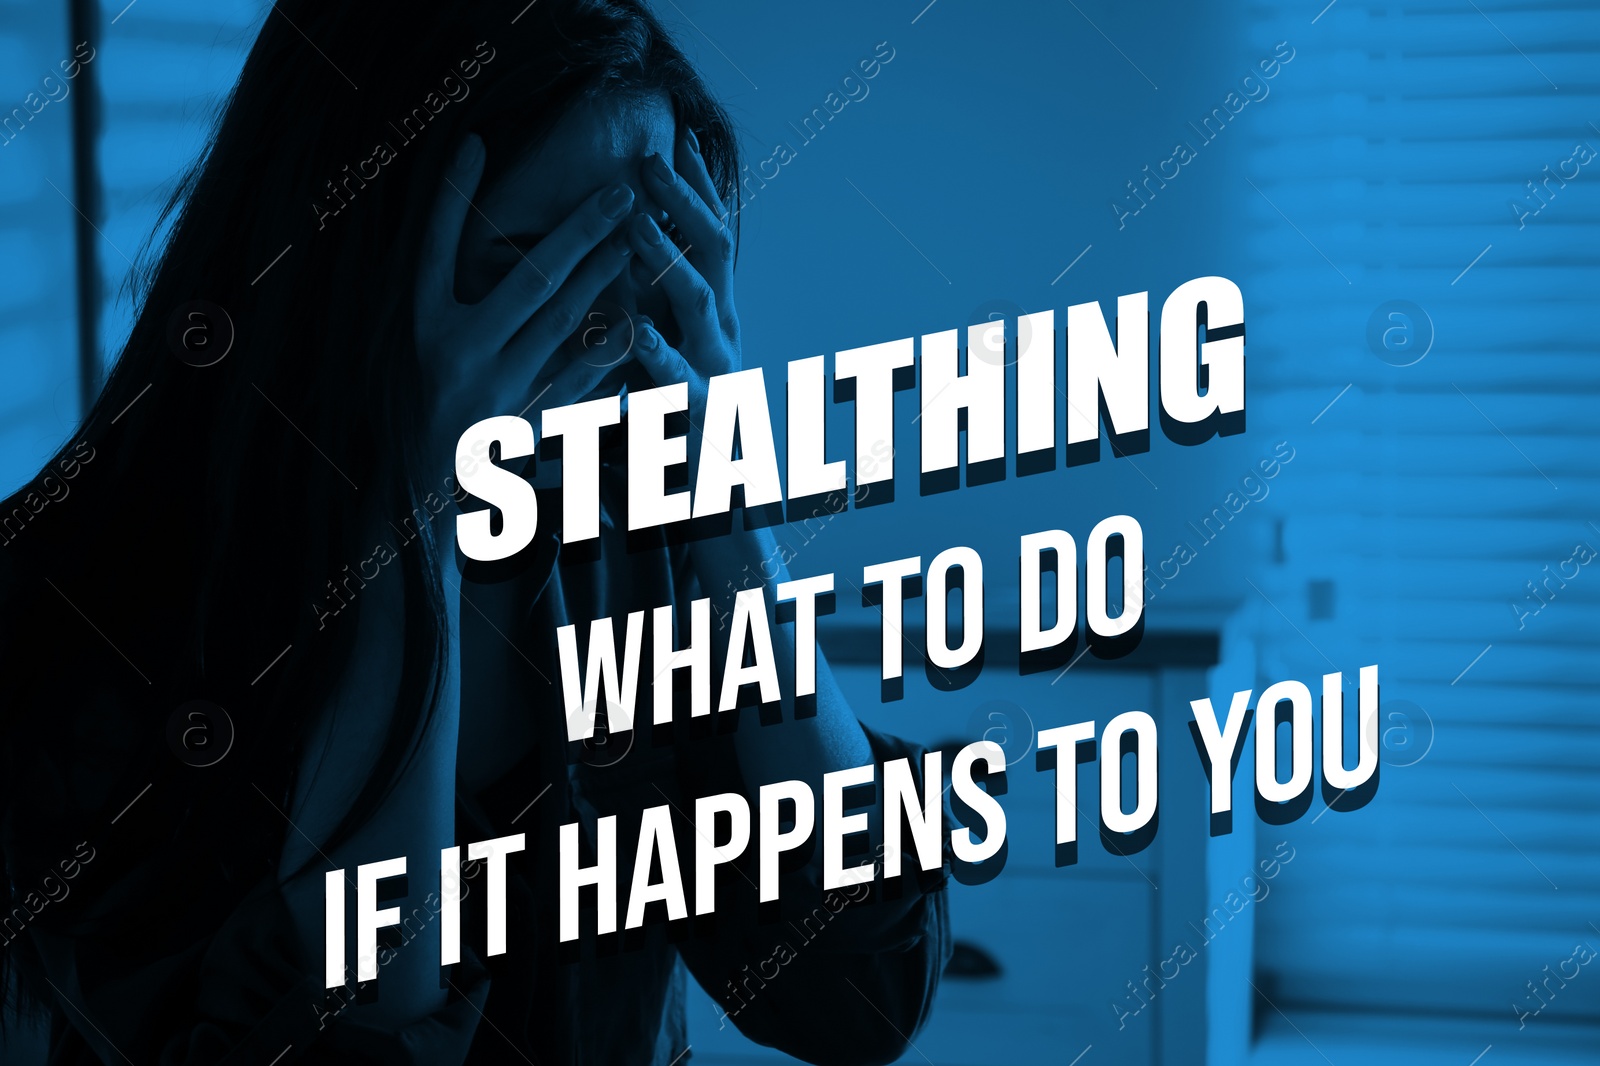 Image of Stealthing What To Do If It Happens To You? Abused woman crying indoors, toned in blue